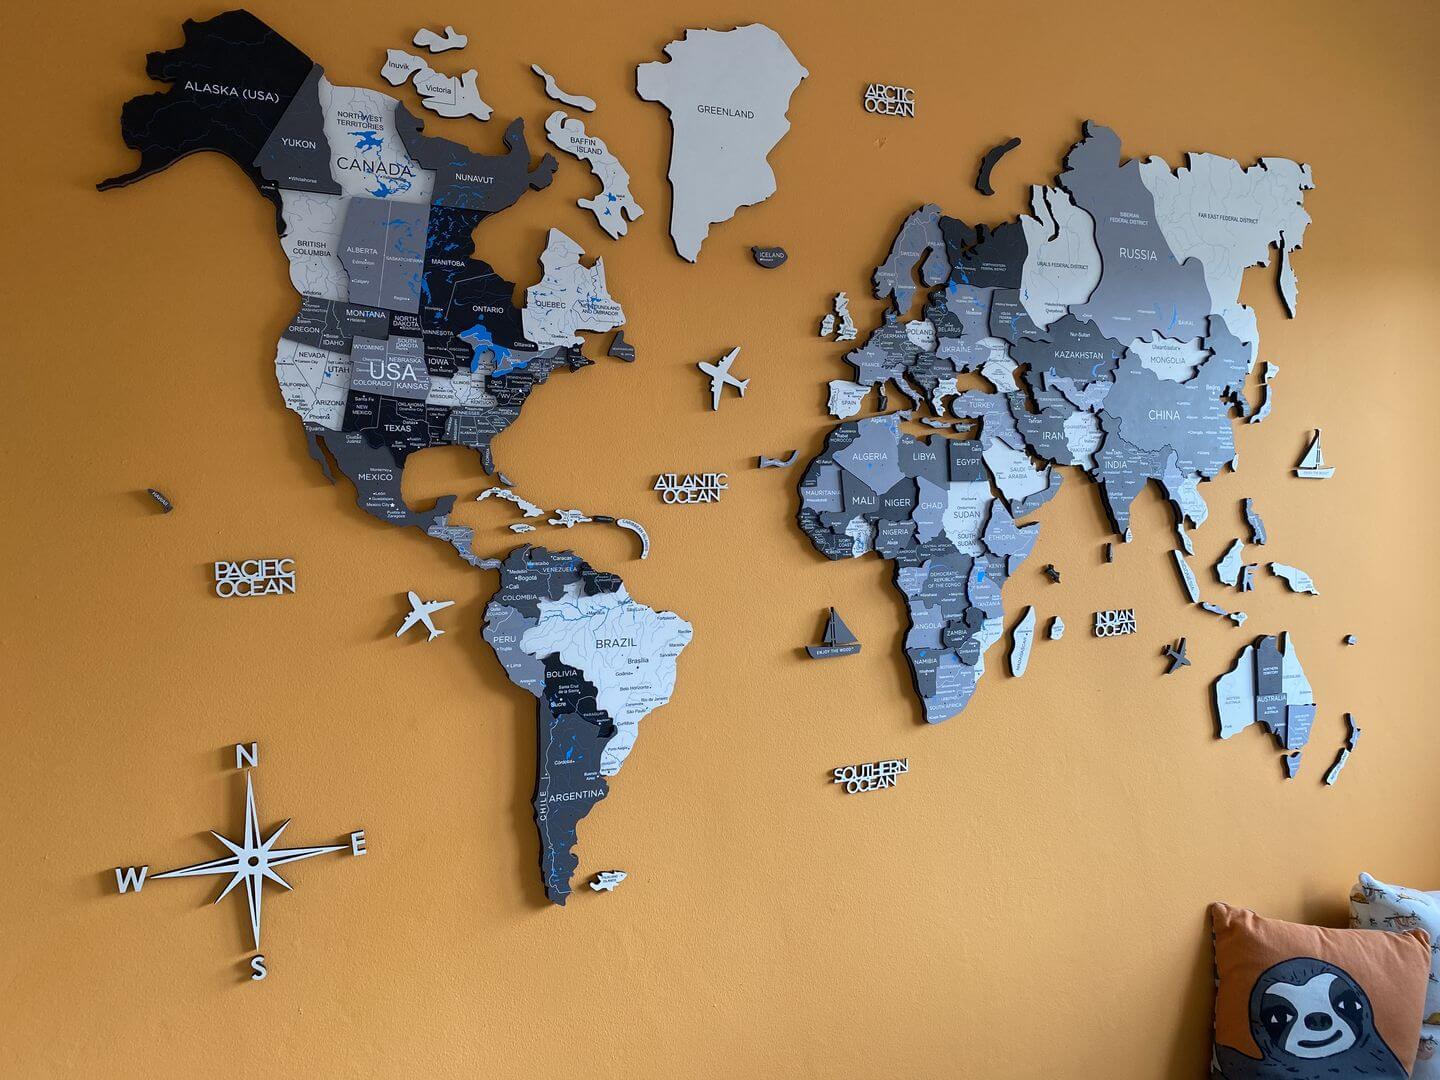 A 3D Wooden World Map in color Nordik on an Orange Wall